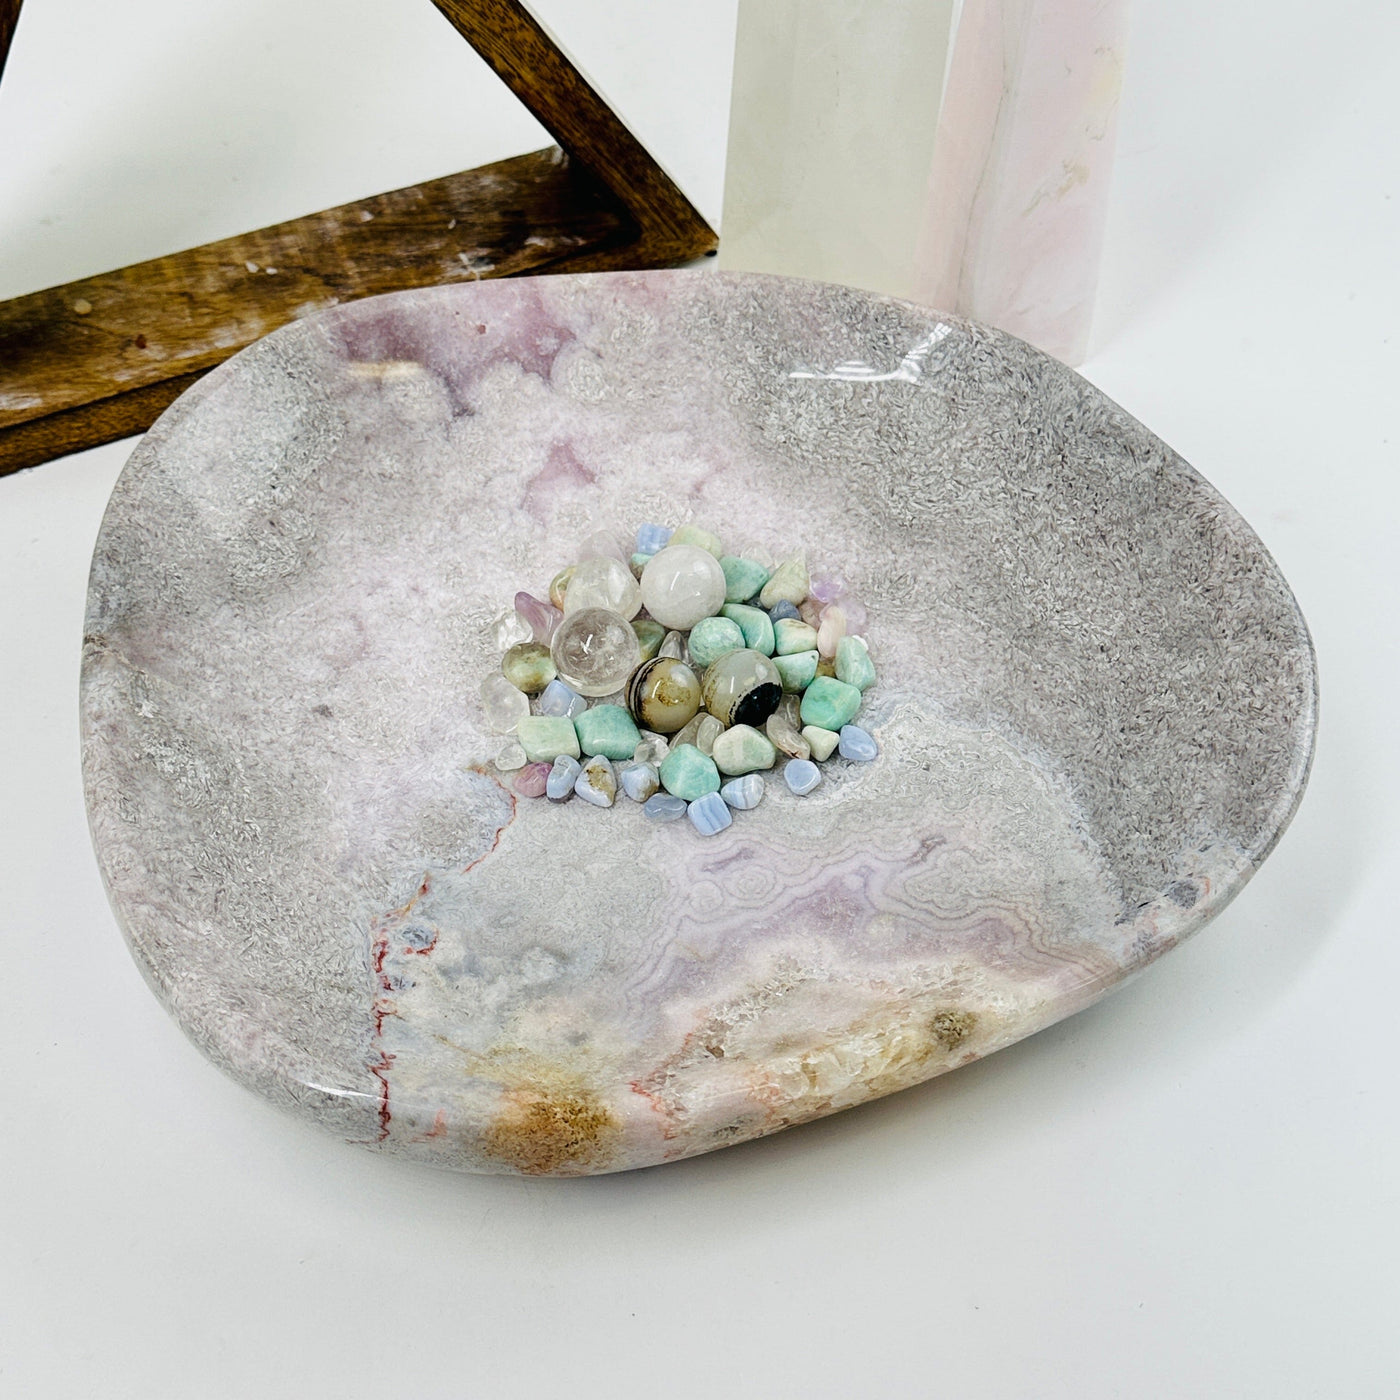 pink amethyst plate with decorations in the background and inside it